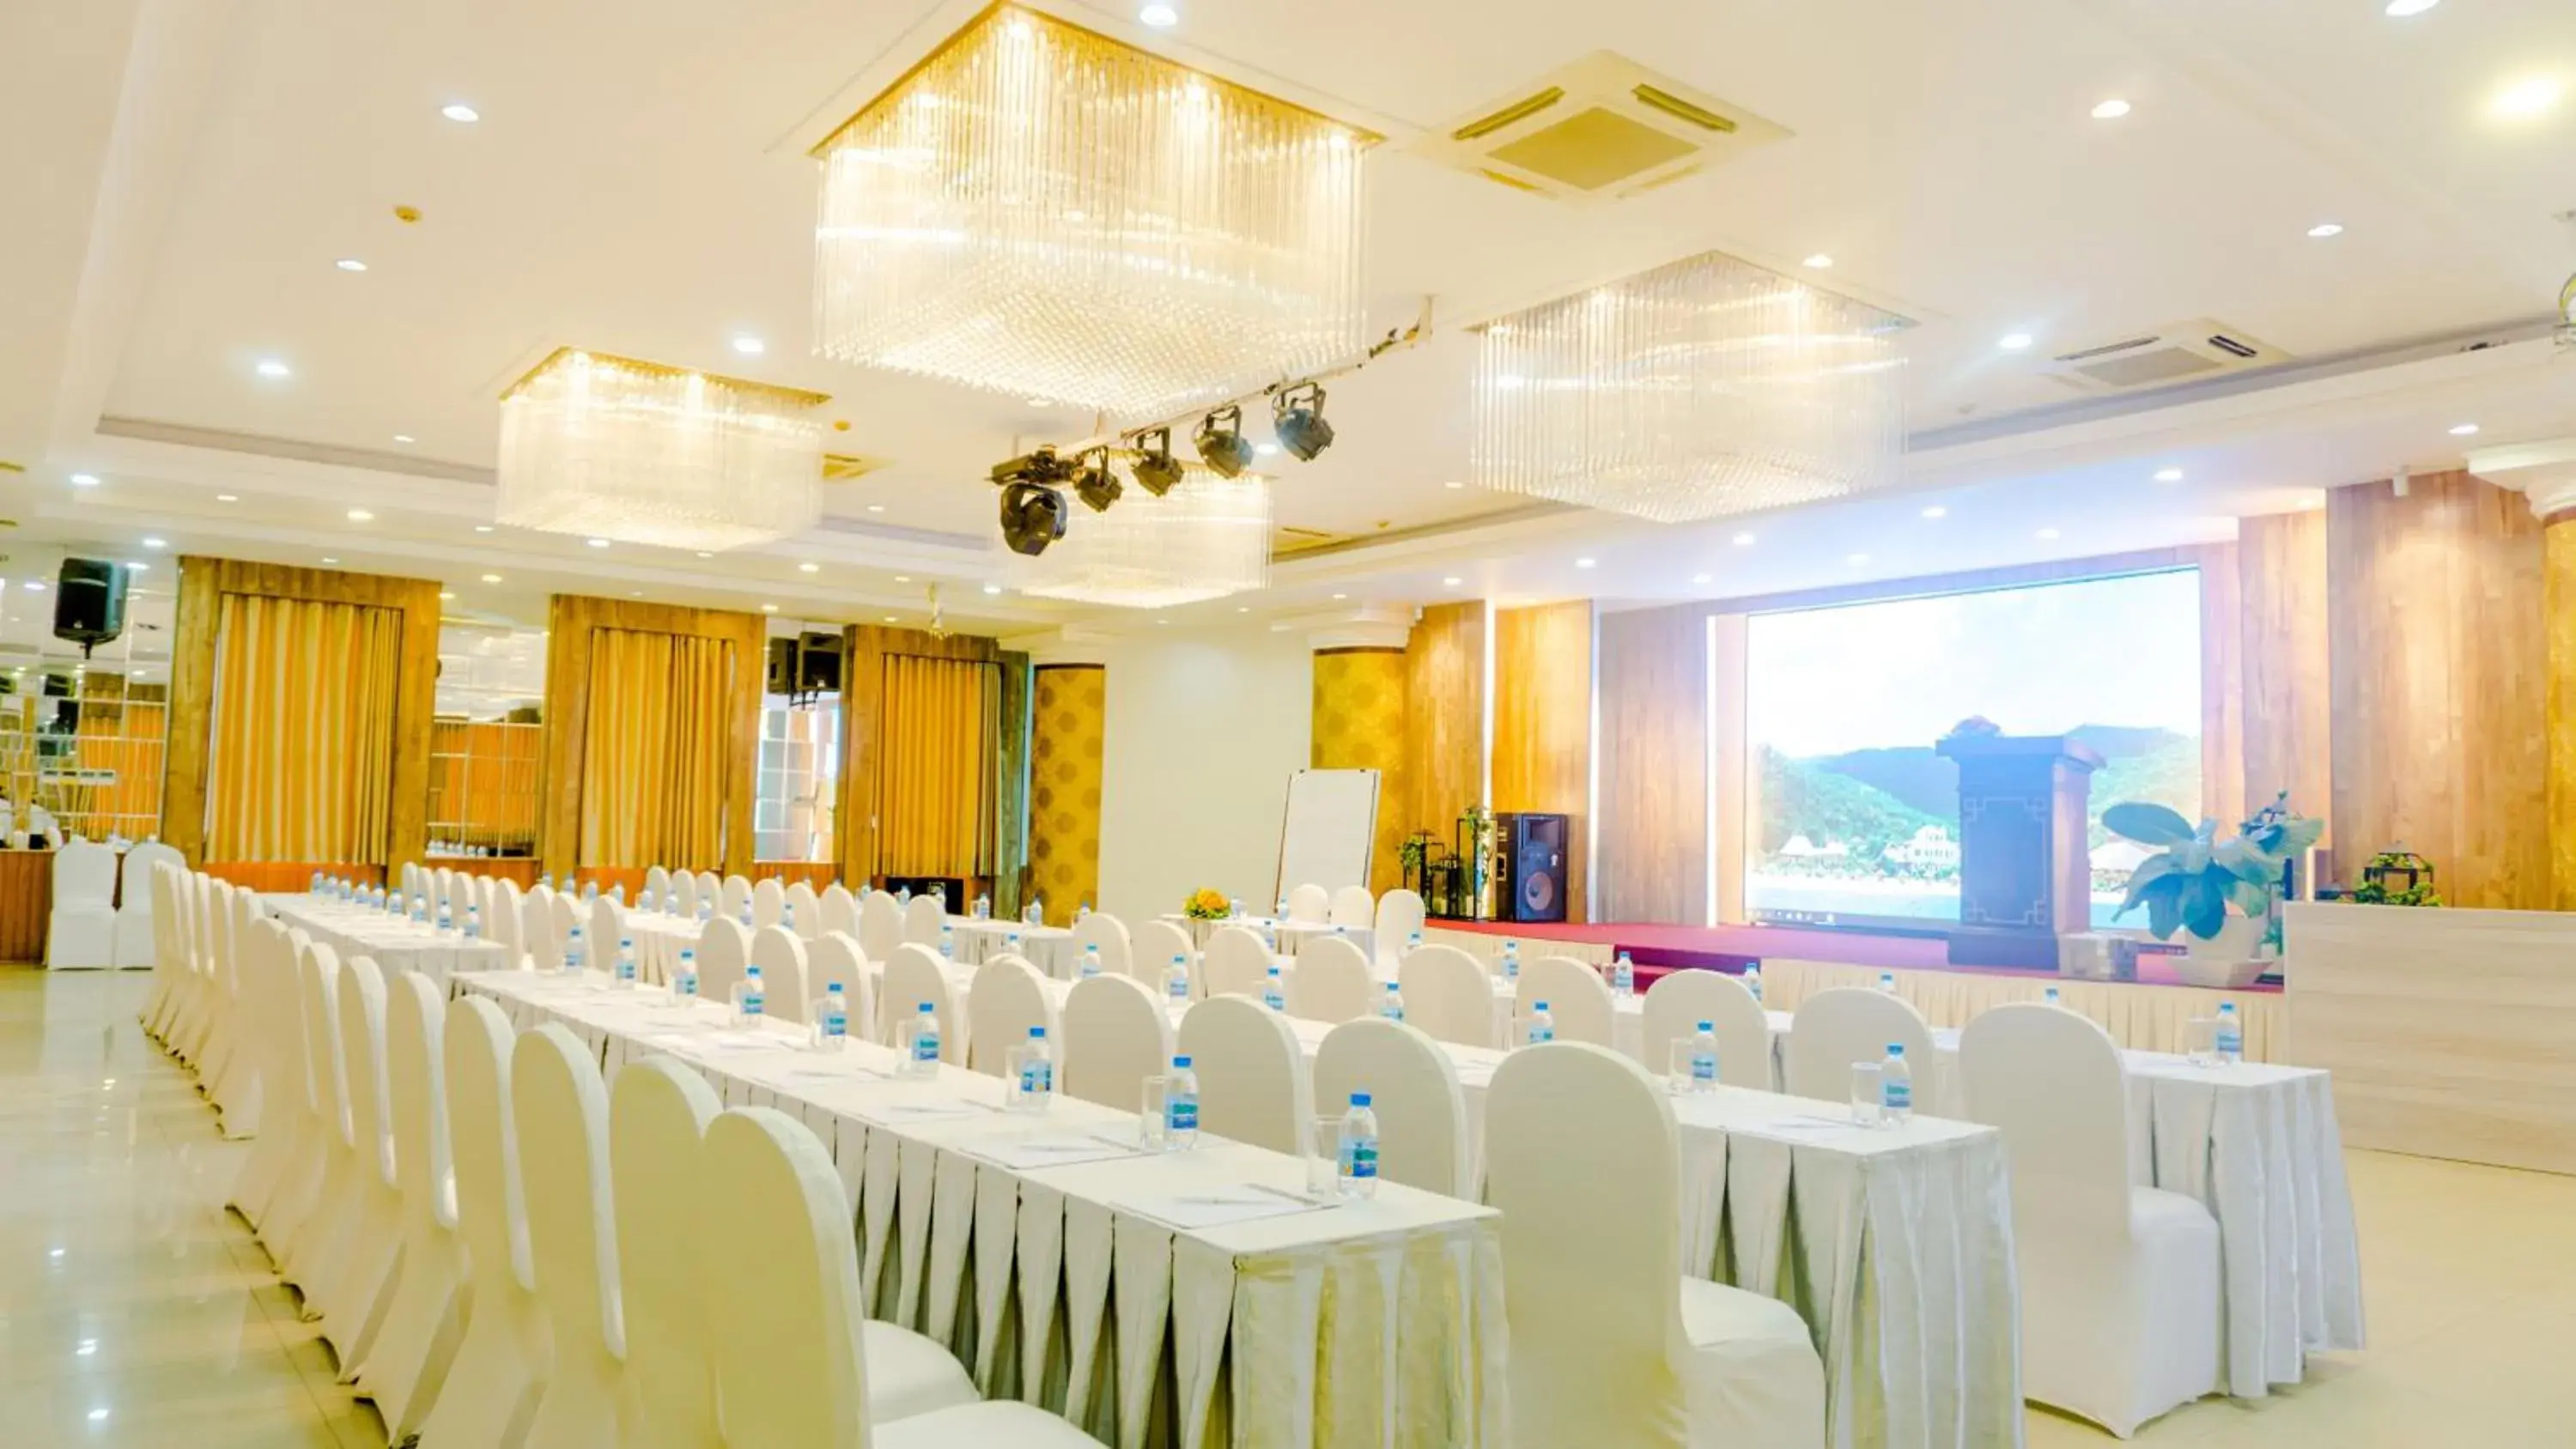 Meeting/conference room, Banquet Facilities in The Light Hotel